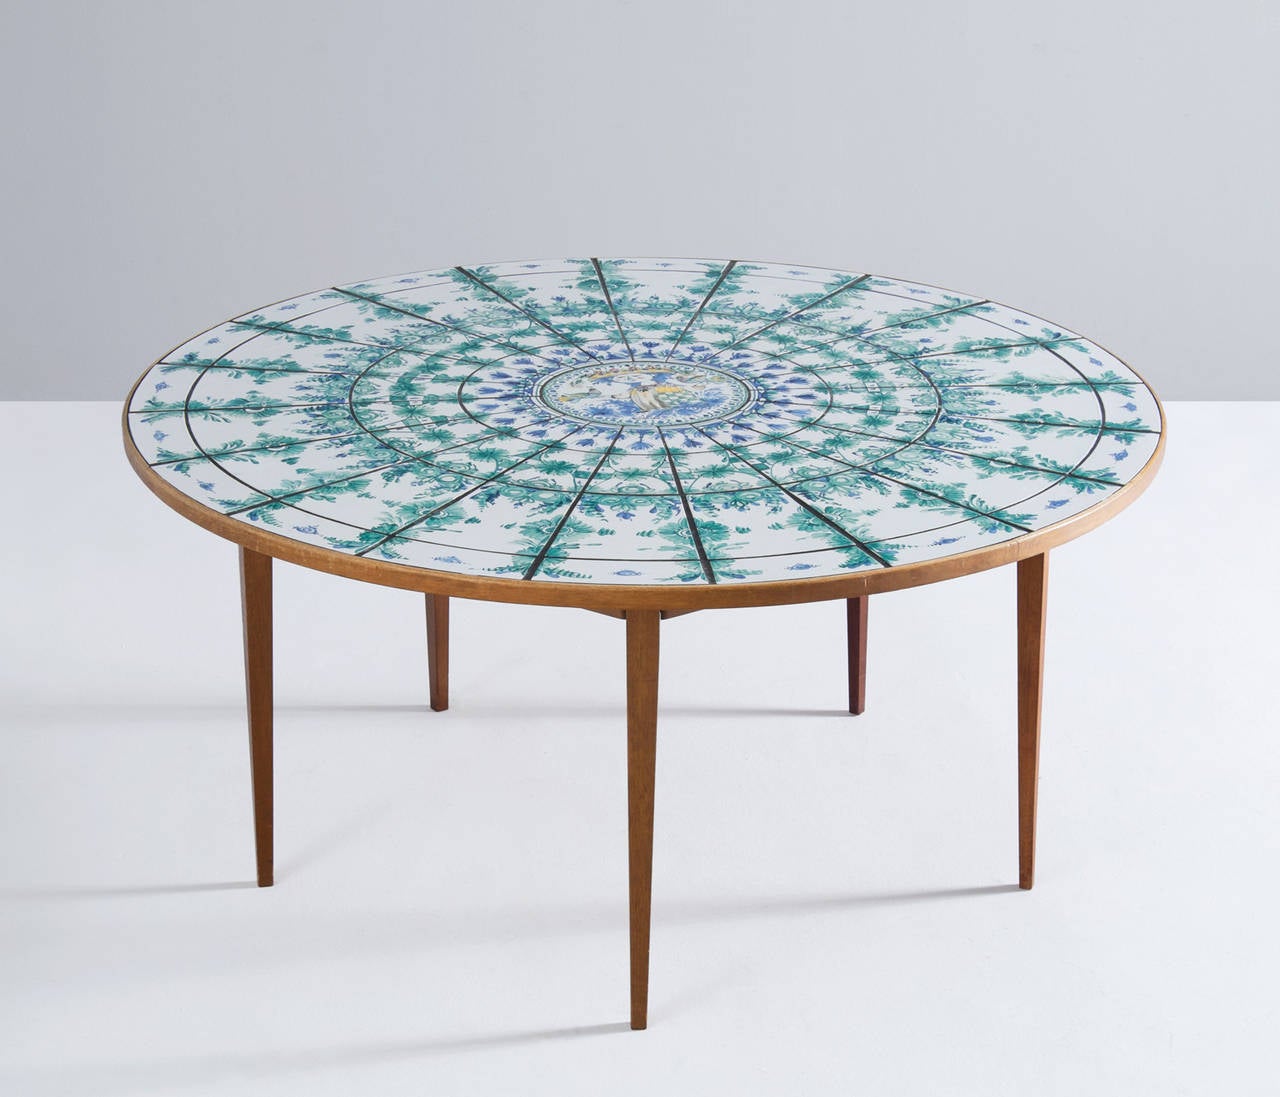 Bjørn Wiinblad round tiled dining table, hand-painted.

Beautifully detailed round dining table with very nice hand-painted tiles in the top. The white and green-blue colored inlaid tiles show nice floral decorative patterns. 
The top is rimmed